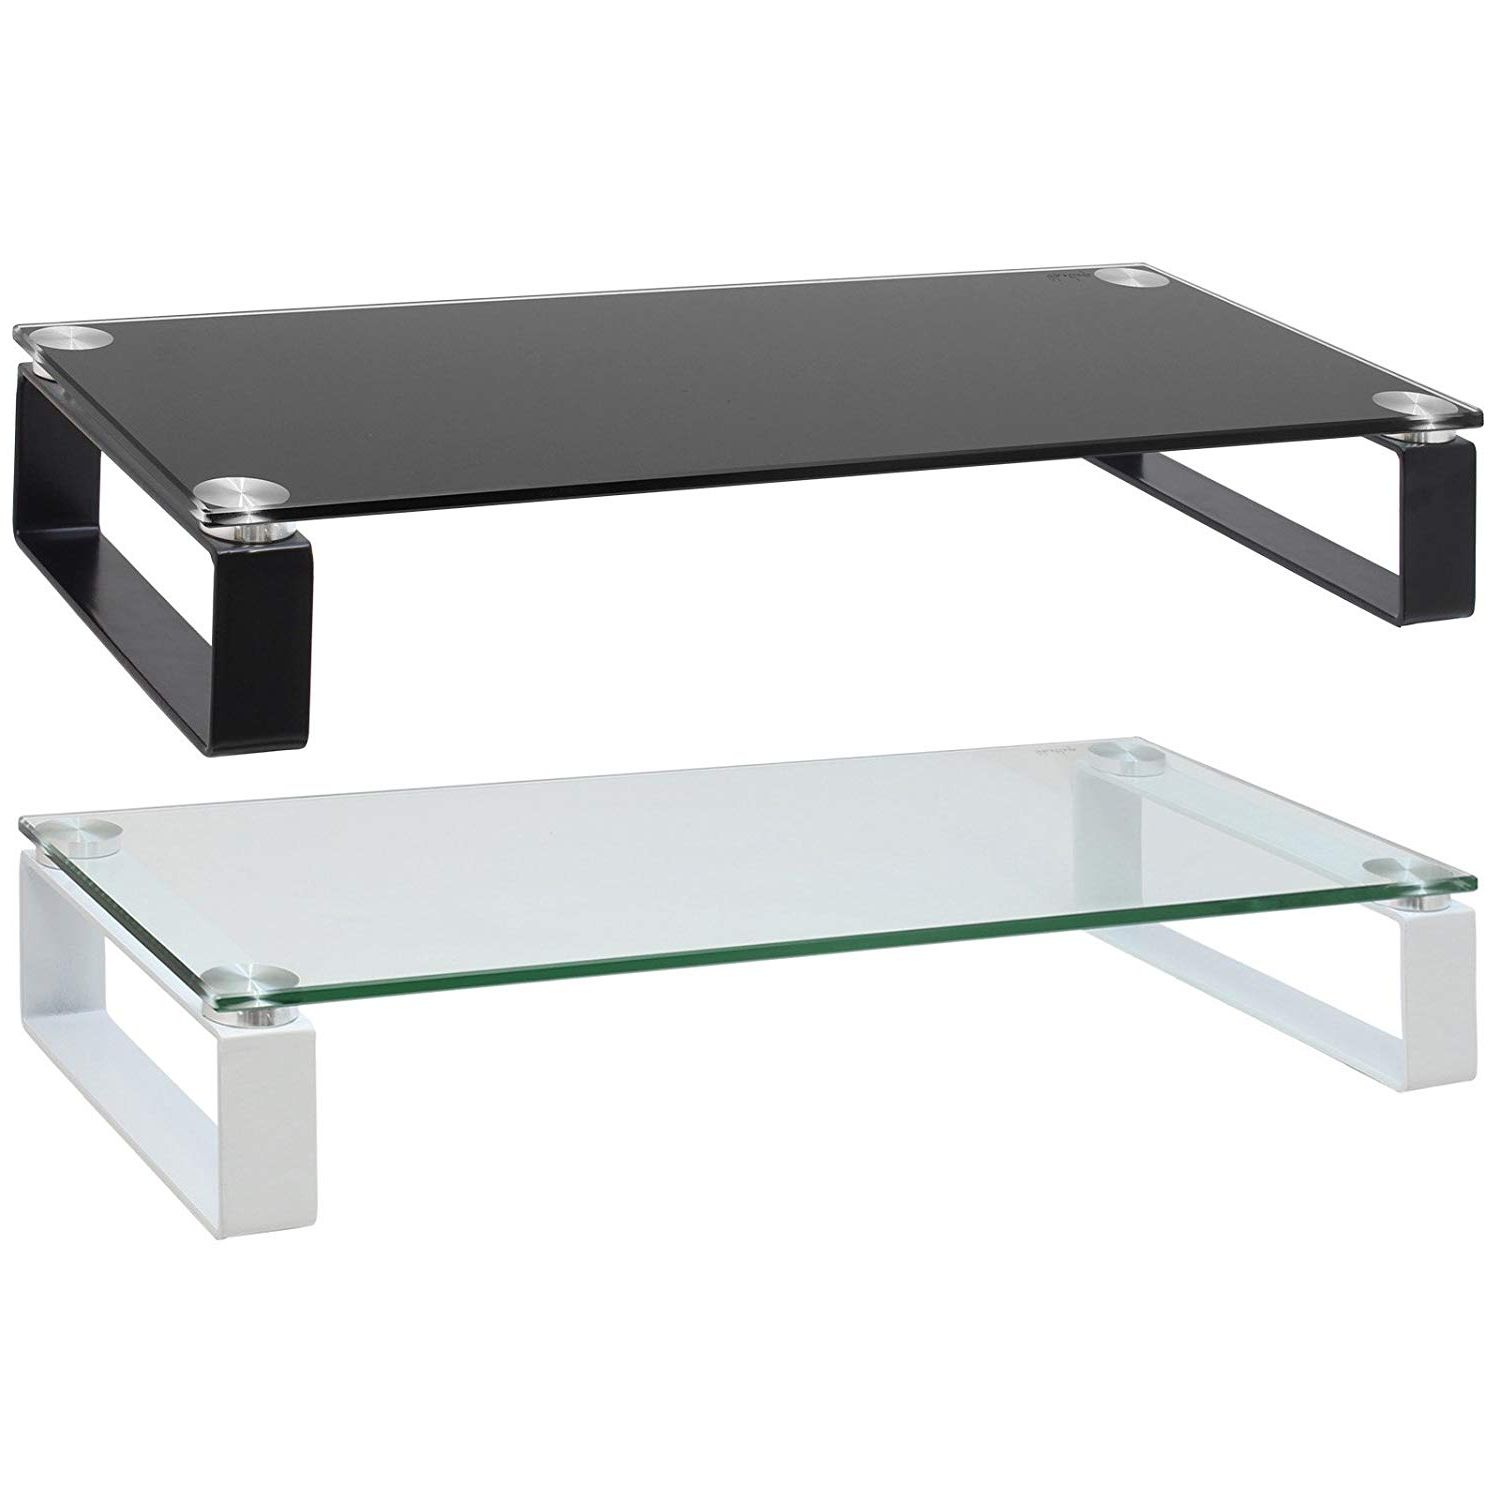 Trendy Tv Riser Stand Intended For Hartleys 60cm 2 Tier Glass Tv Monitor Riser Shelf – Choice Of Colour (View 6 of 20)